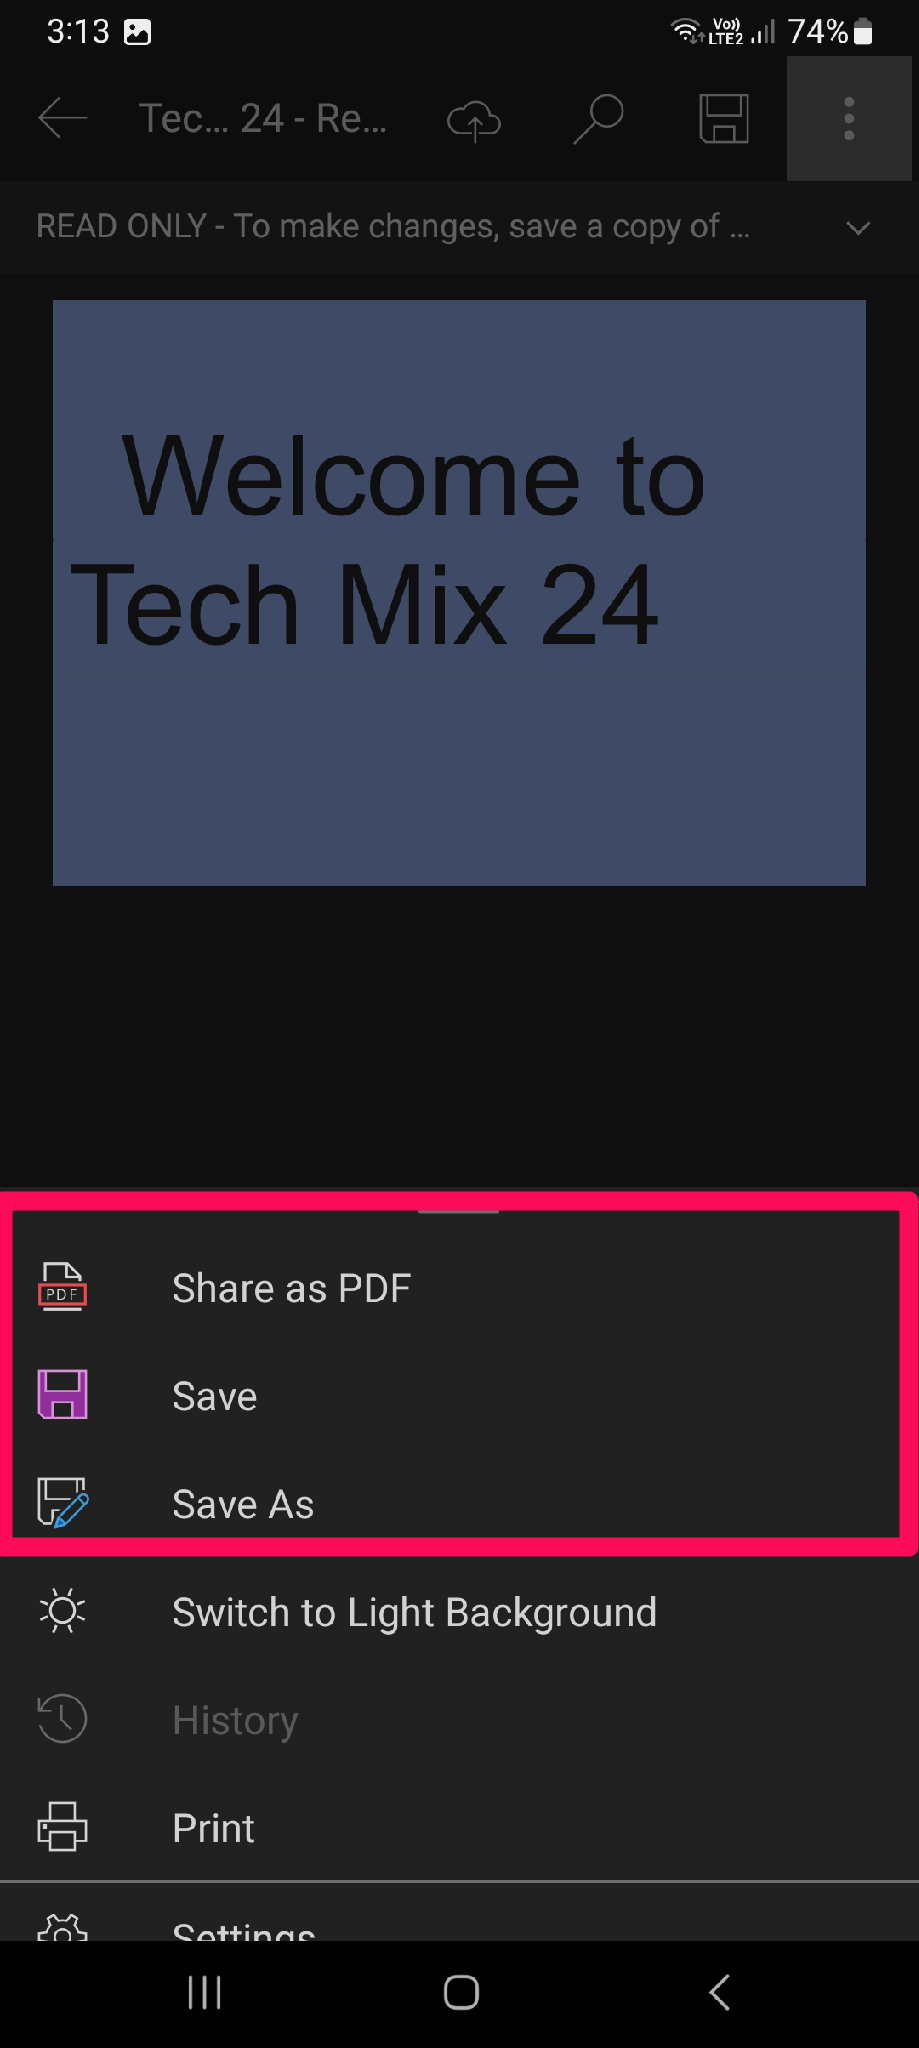 Share or save the file